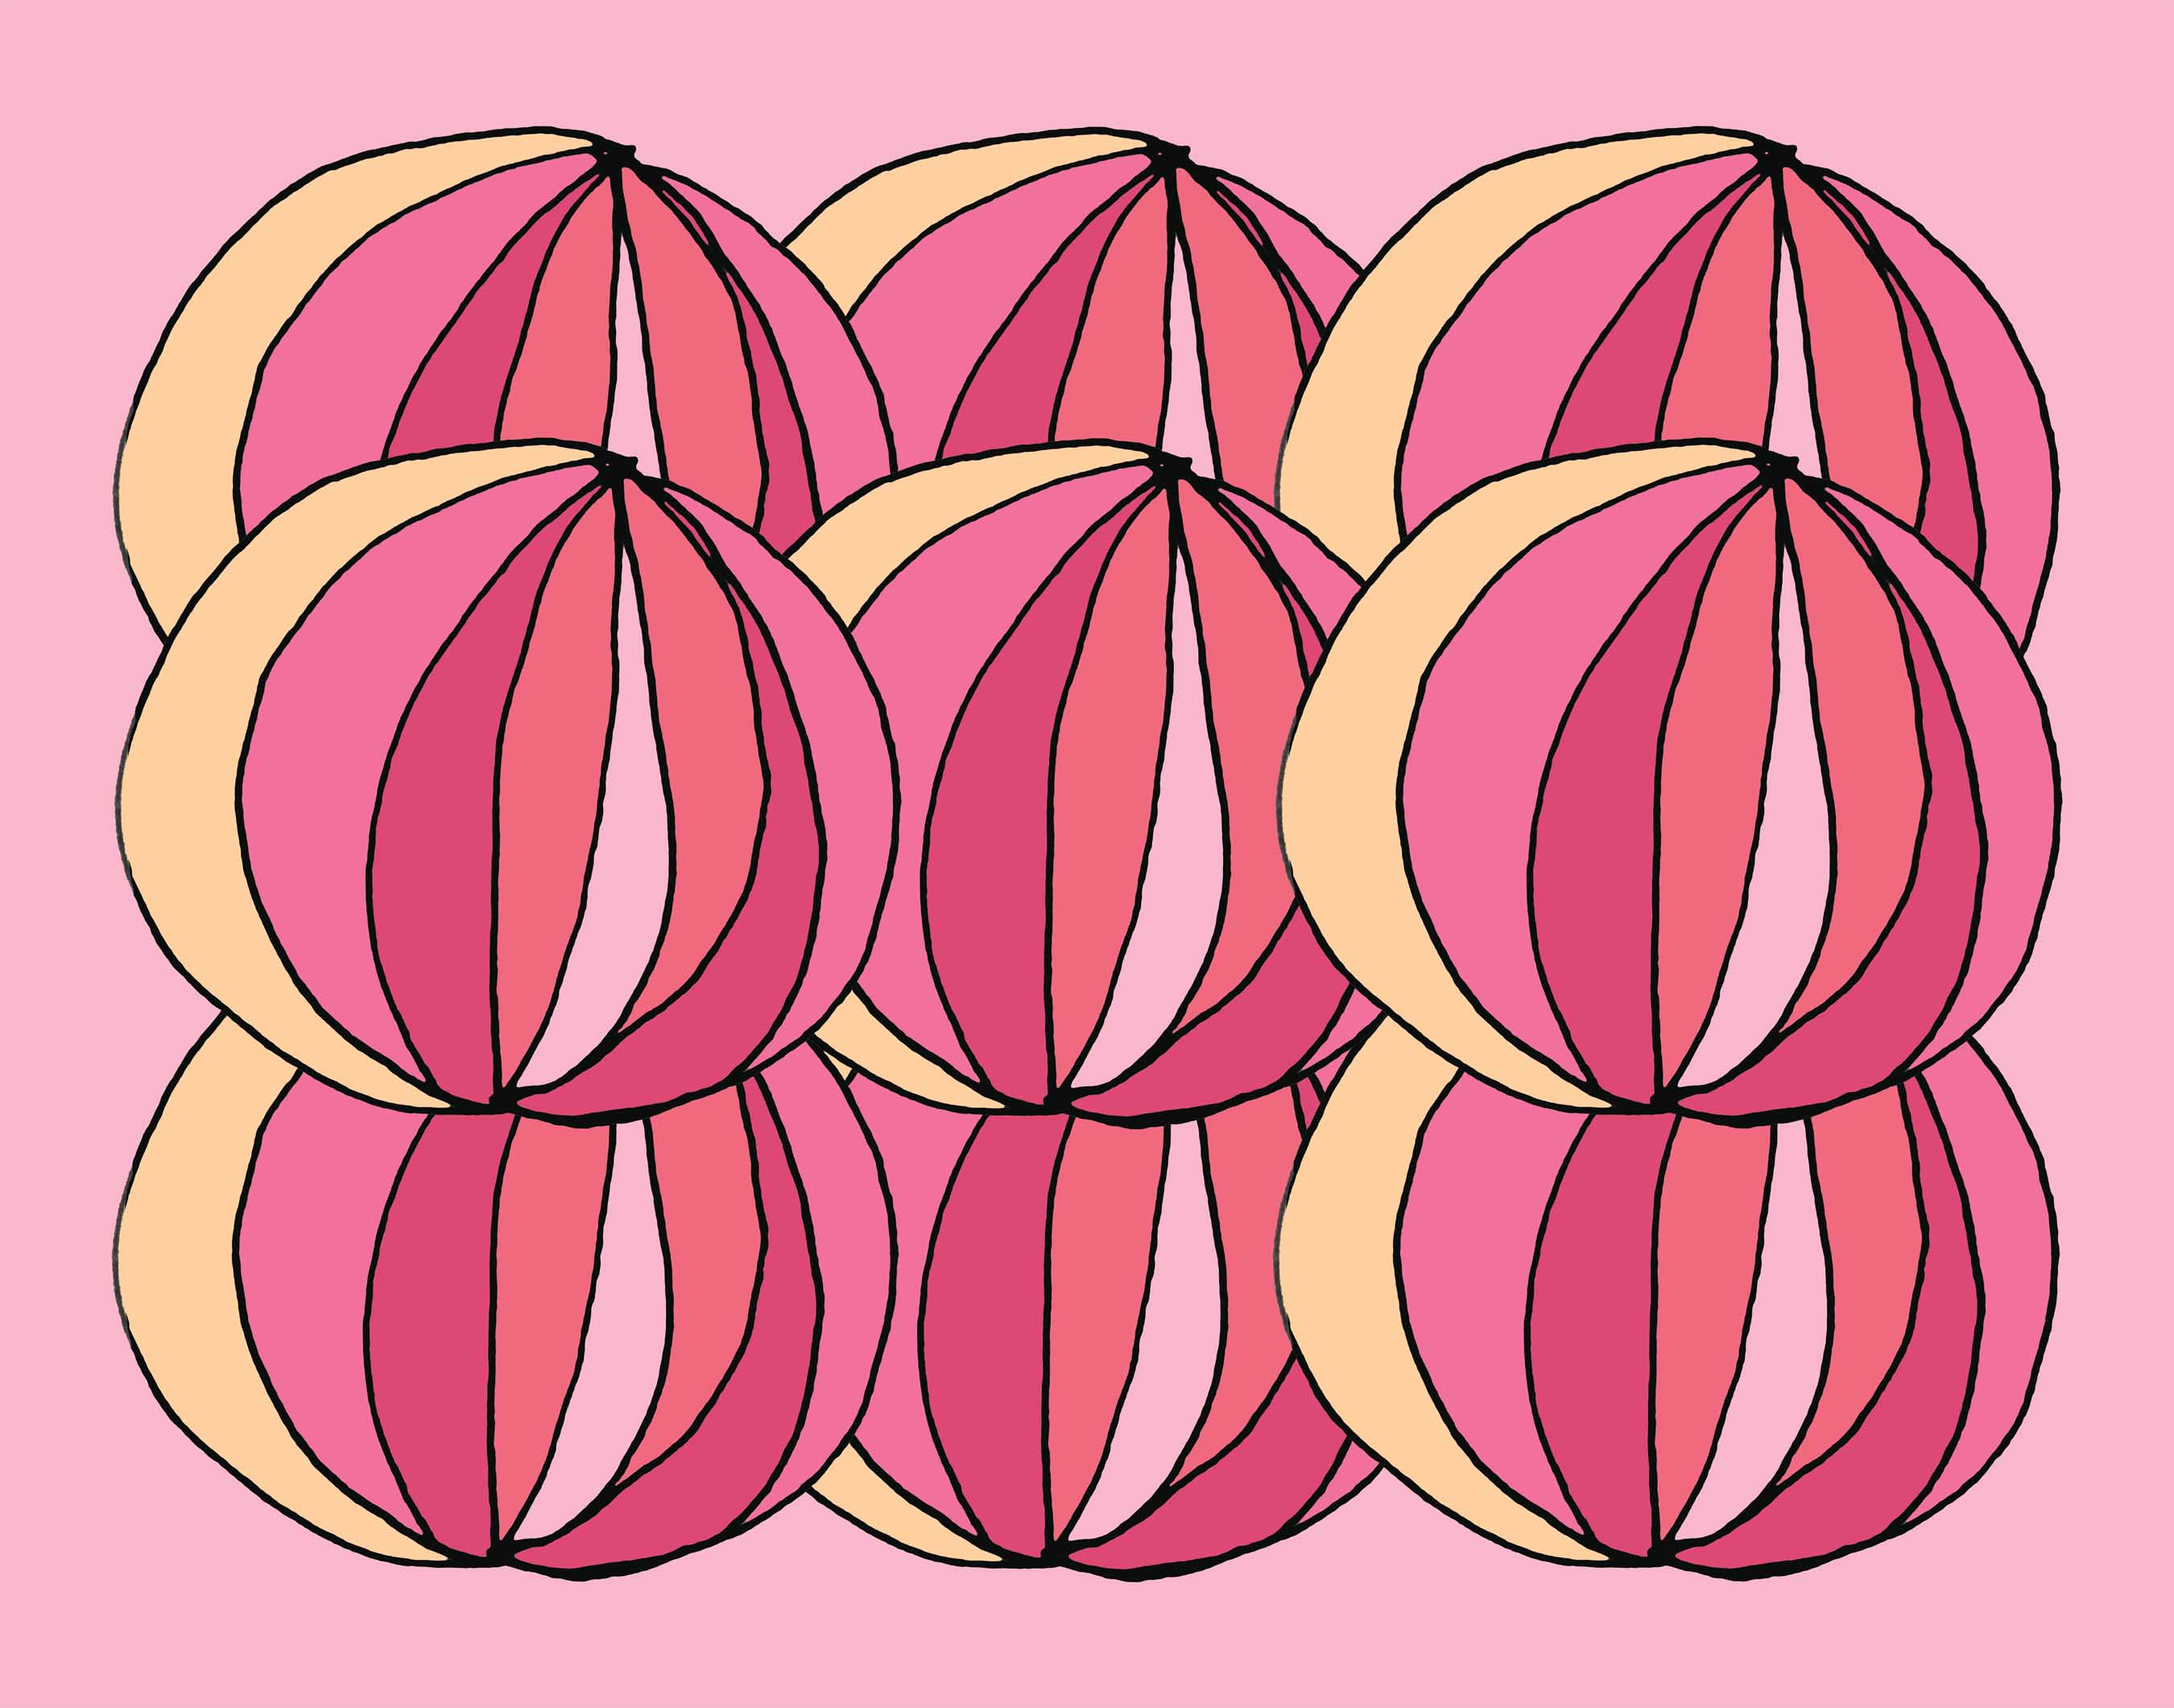 art every day number 335 / illustration / pattern / layered pinks